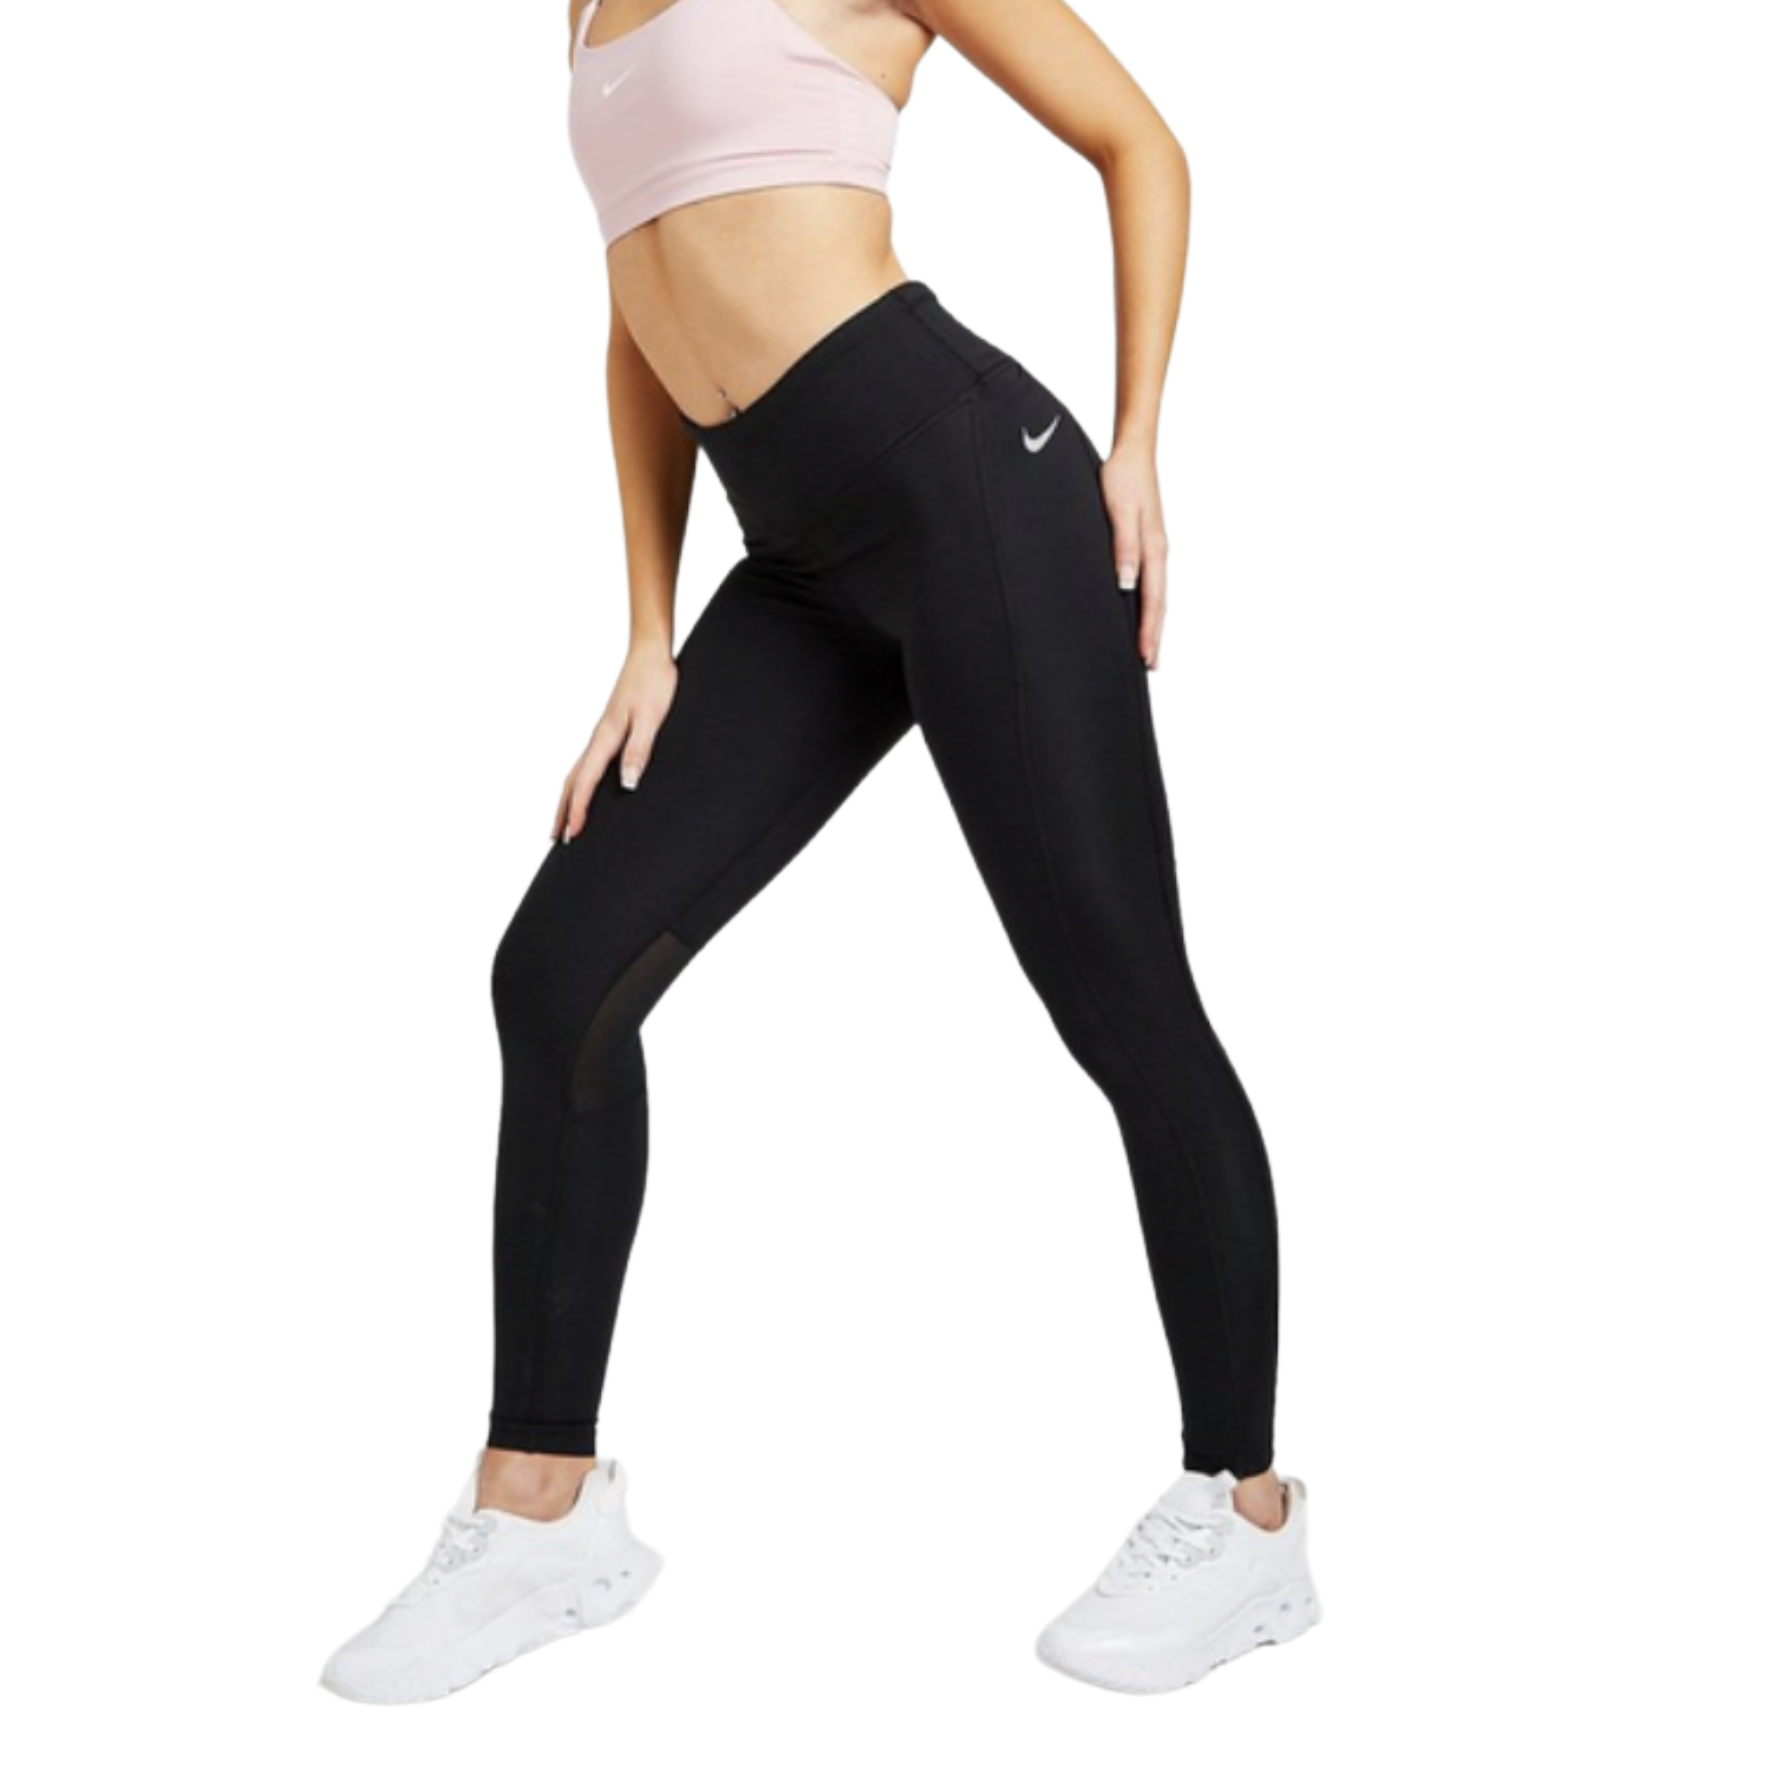 Made to move, these women's Running Epic Fast Tights from Nike have comfort covered - whatever the distance. In a Black colourway, these tight-fit leggings are made from Nike's Power fabric, which is stretchy and supportive. They come with Dri-FIT tech to wick away sweat and feature breathable mesh panels to the back of the knees. With full-length legs, these running tights have an elasticated, mid-rise waistband with an adjustable drawcord for a custom fit. They come with hidden pockets for small essentials and are finished with Nike branding to the hip. Machine washable.